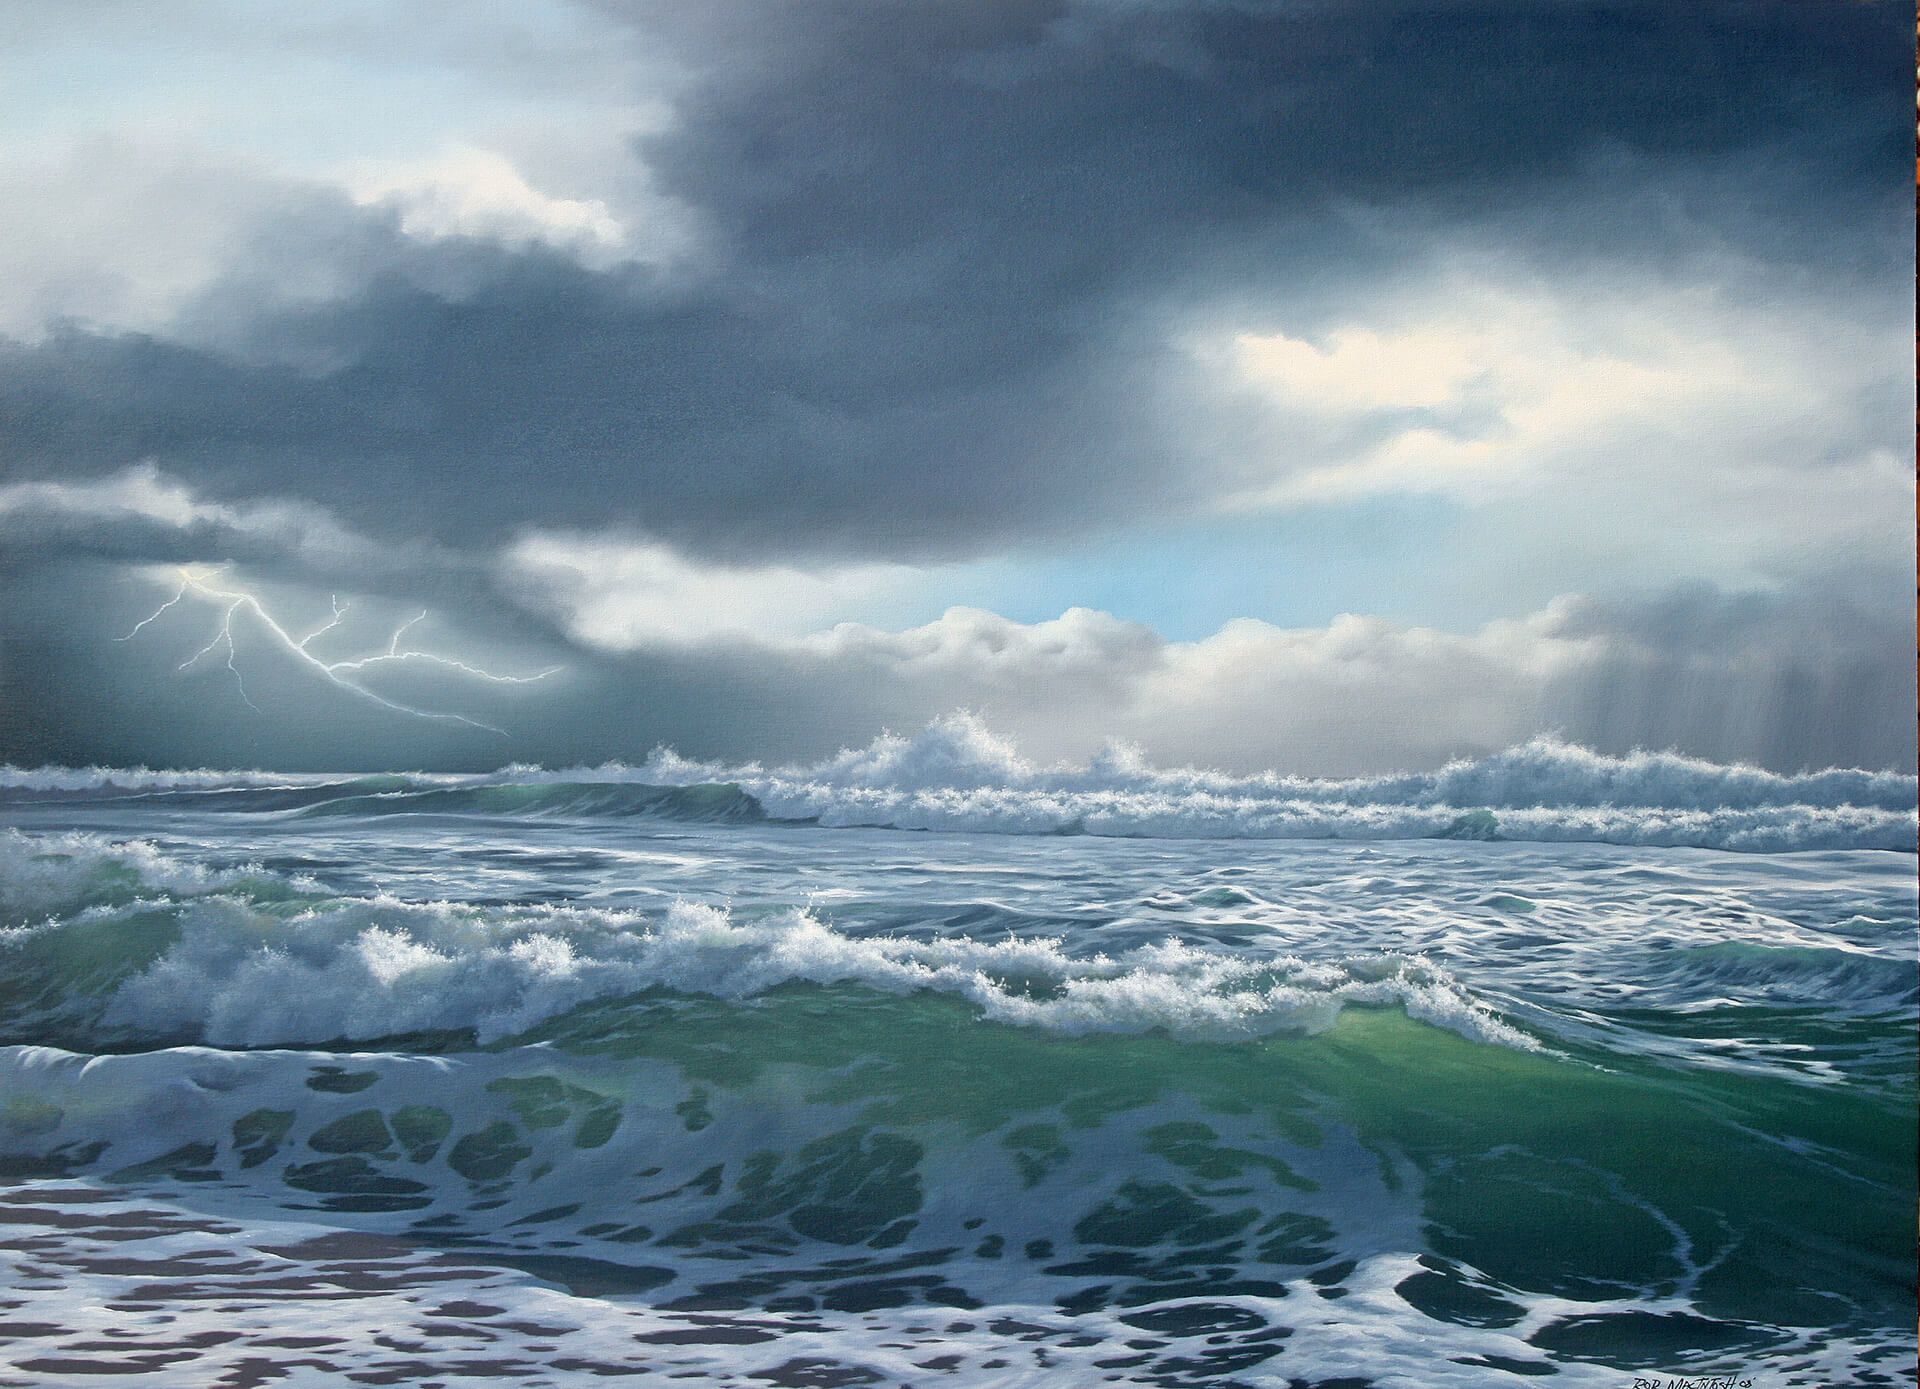 Photorealistic painting of a storm over the ocean